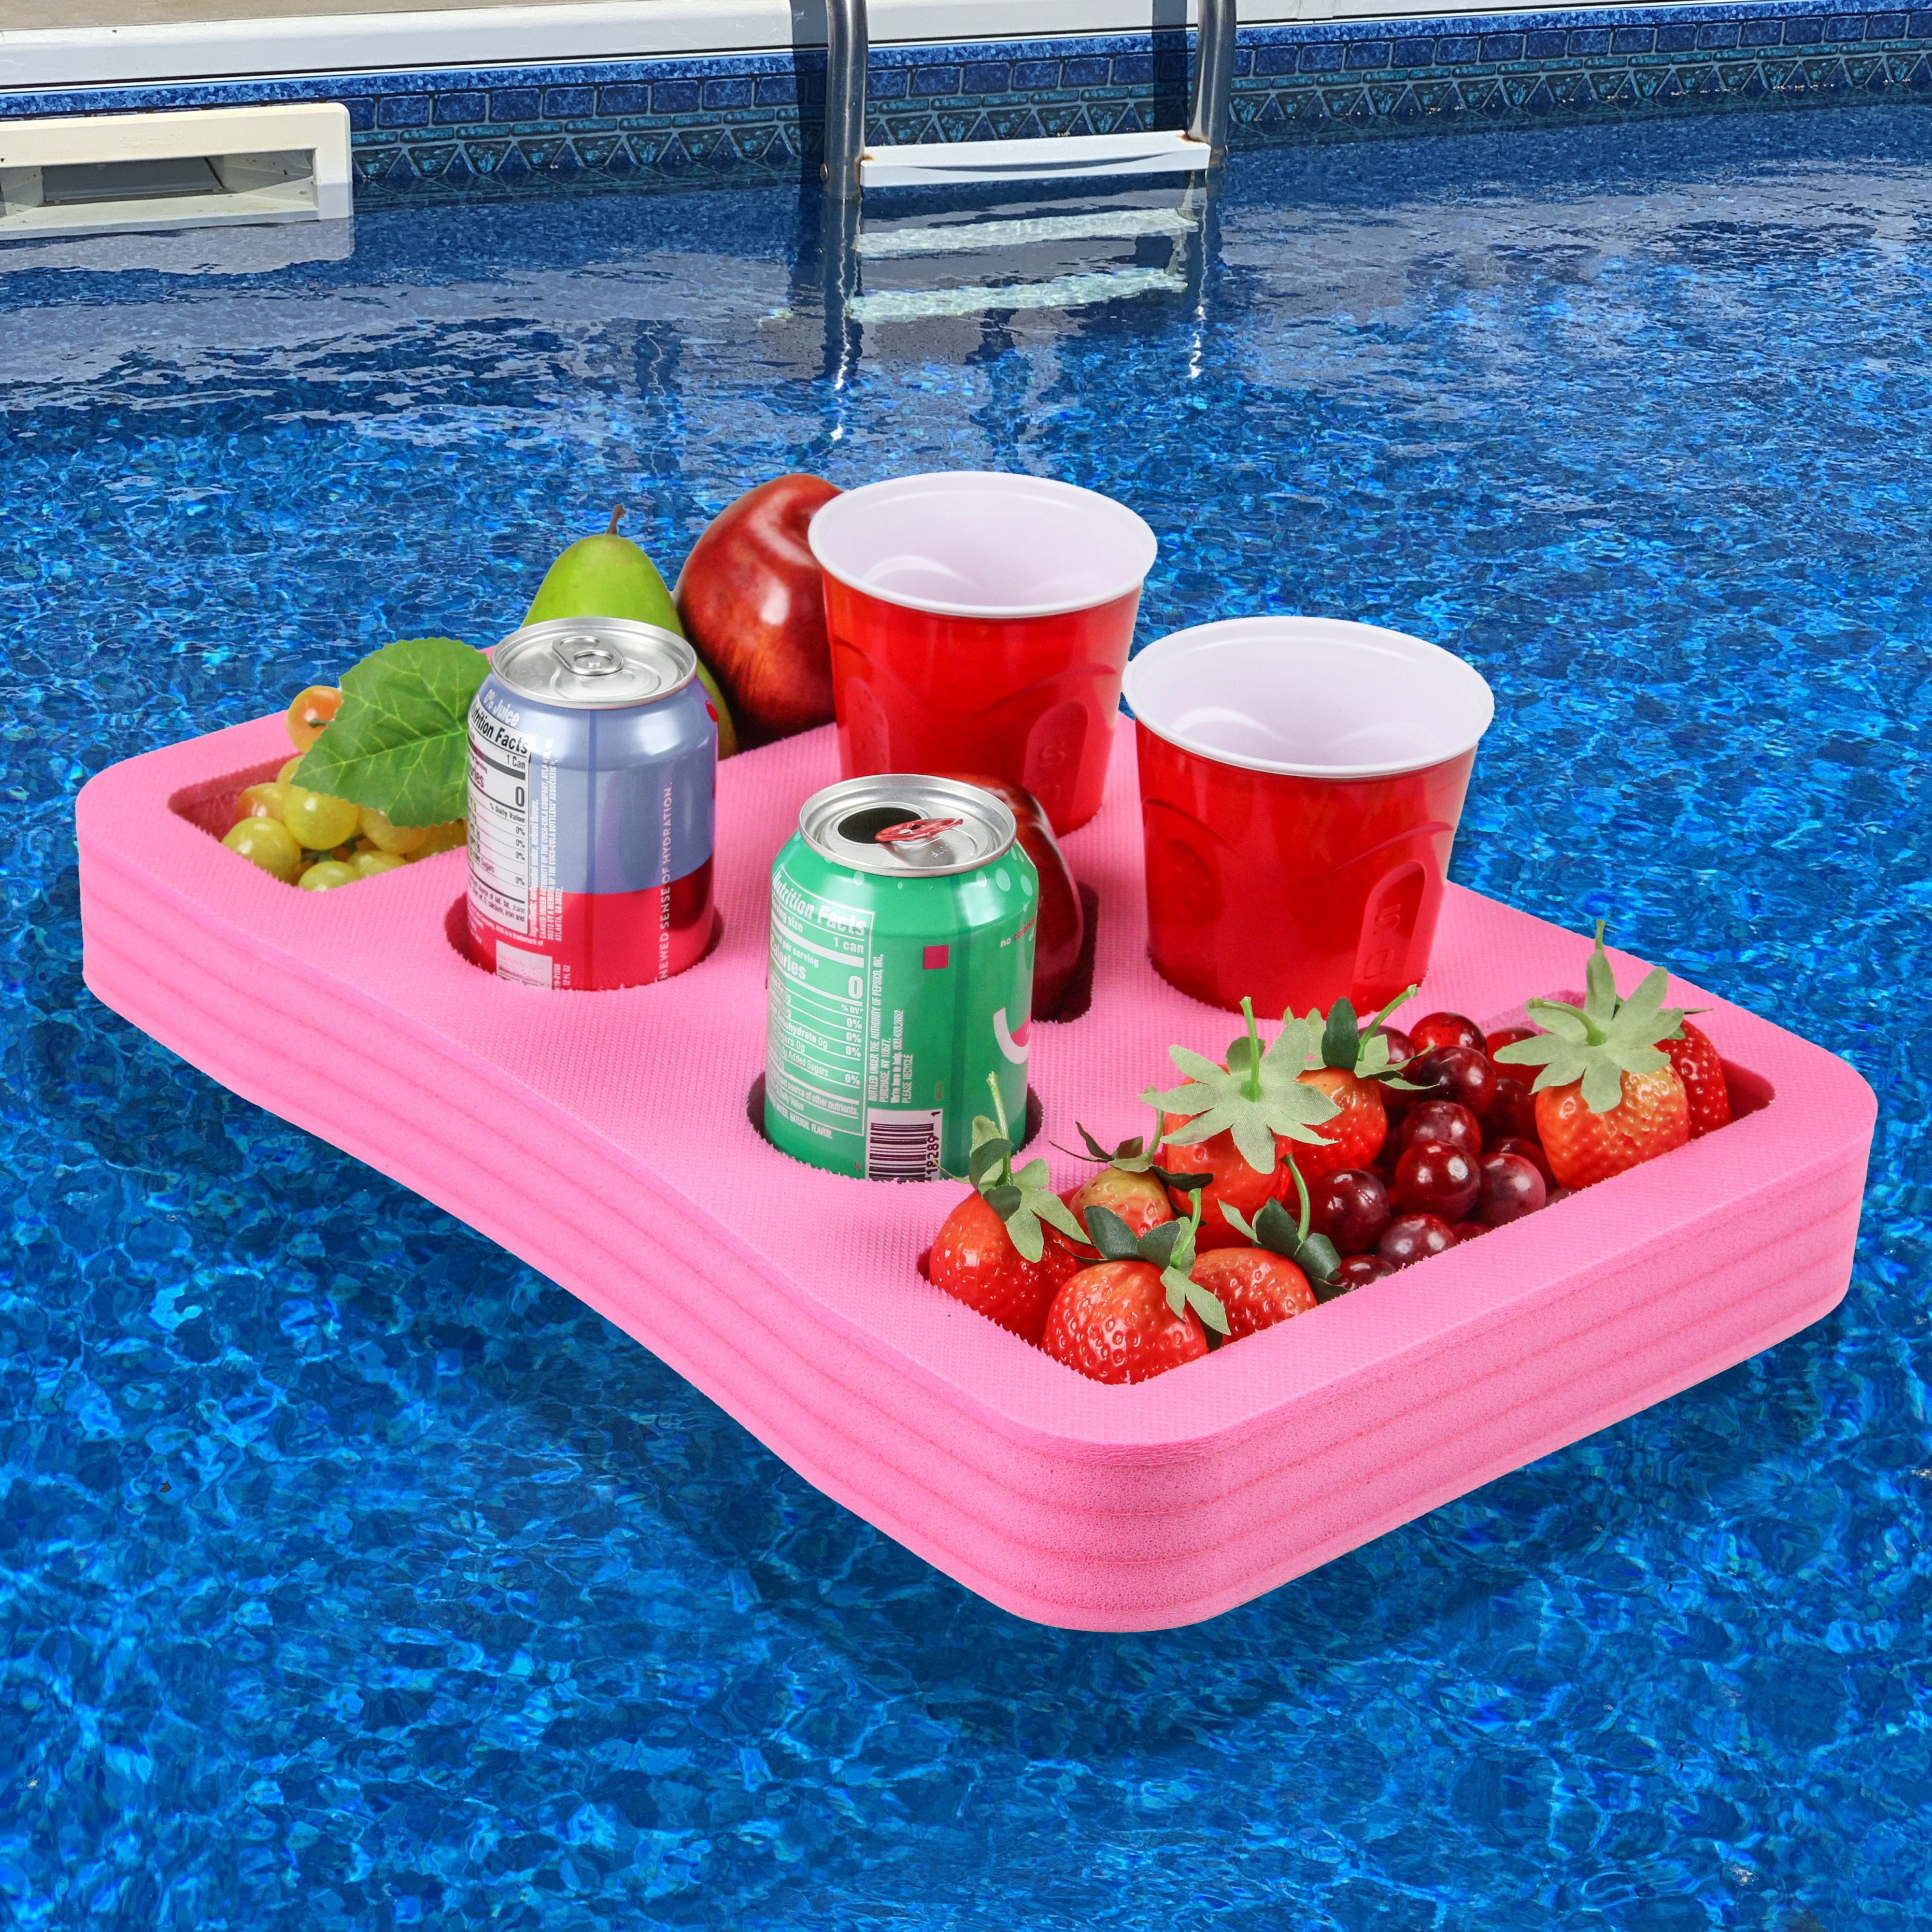 Floating Drink Holder Refreshment Spa Hot Tub Bar Table Tray for Pool or Beach Party Float Lounge Durable Foam 7 Compartment UV Resistant